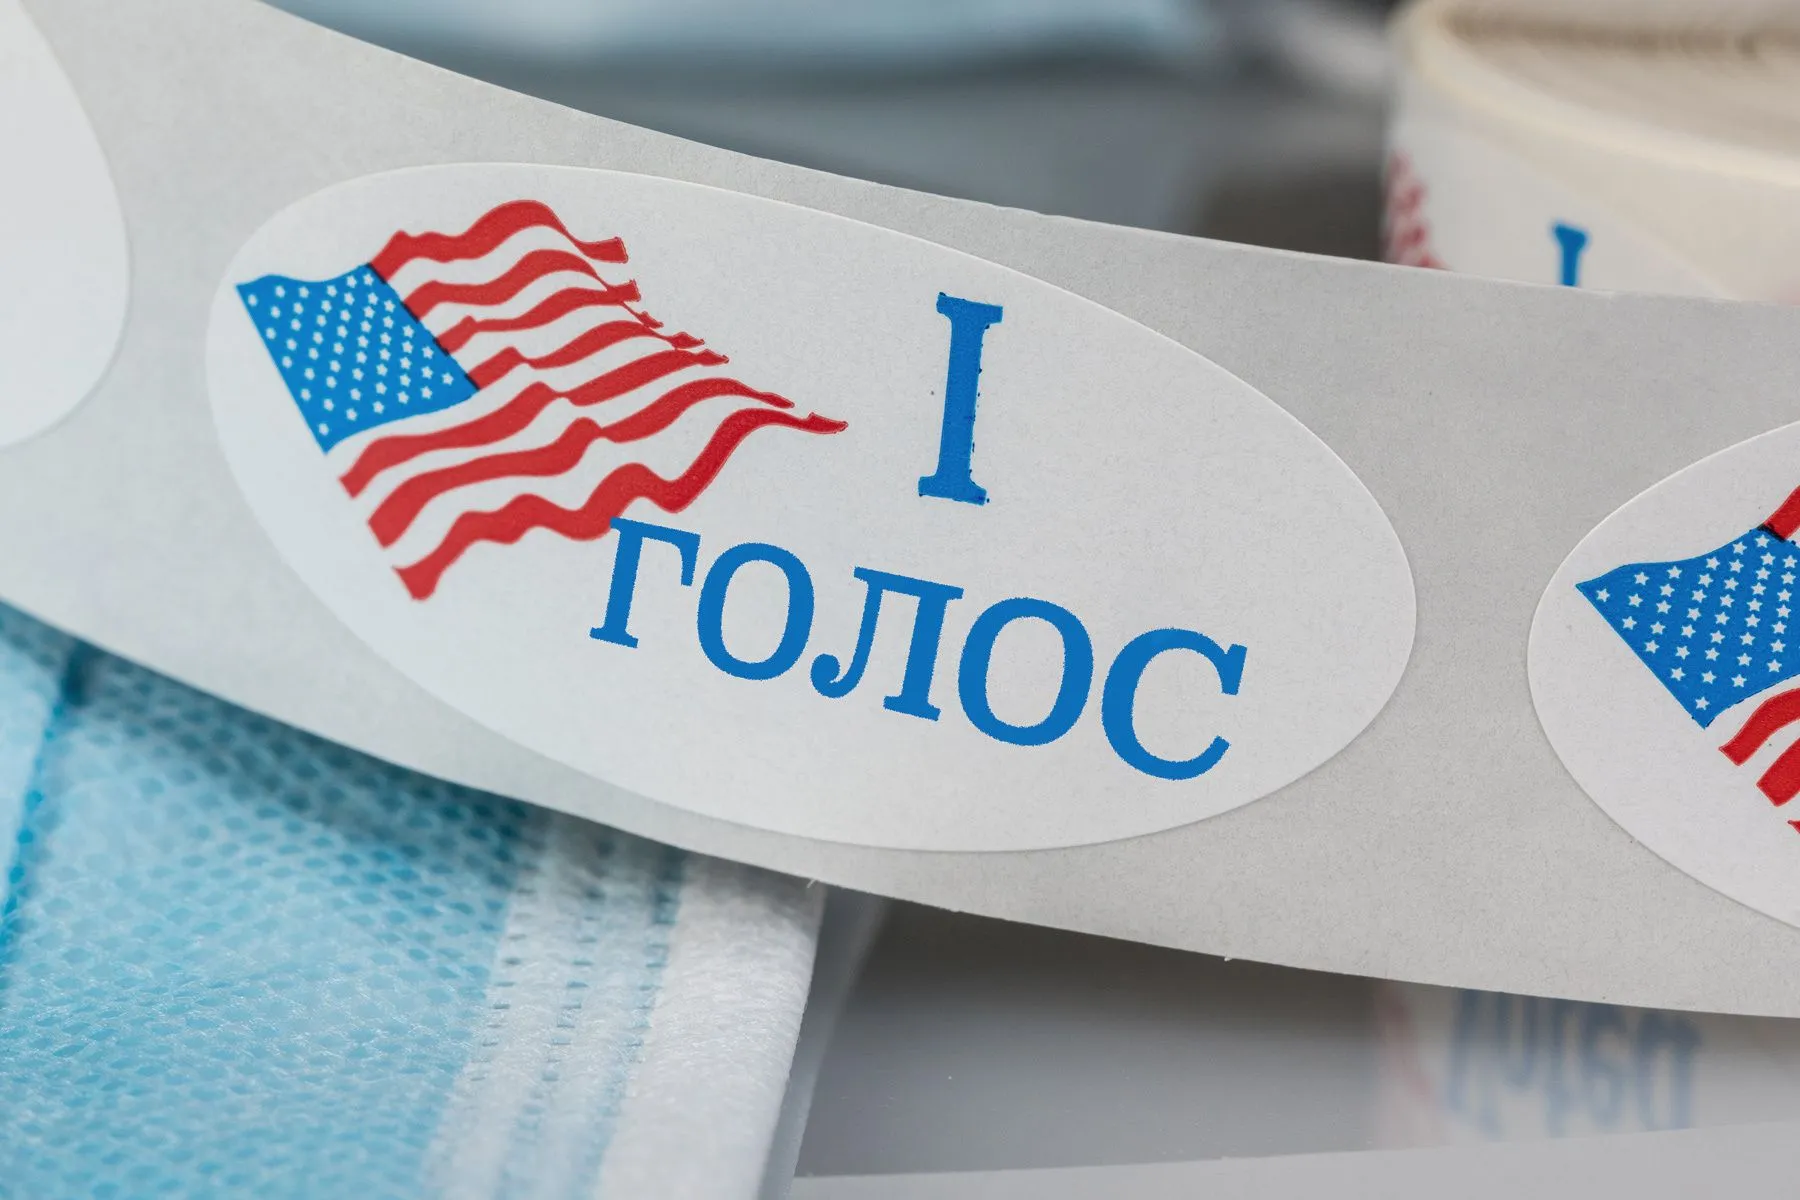 An "I Voted" sticker in Russian.